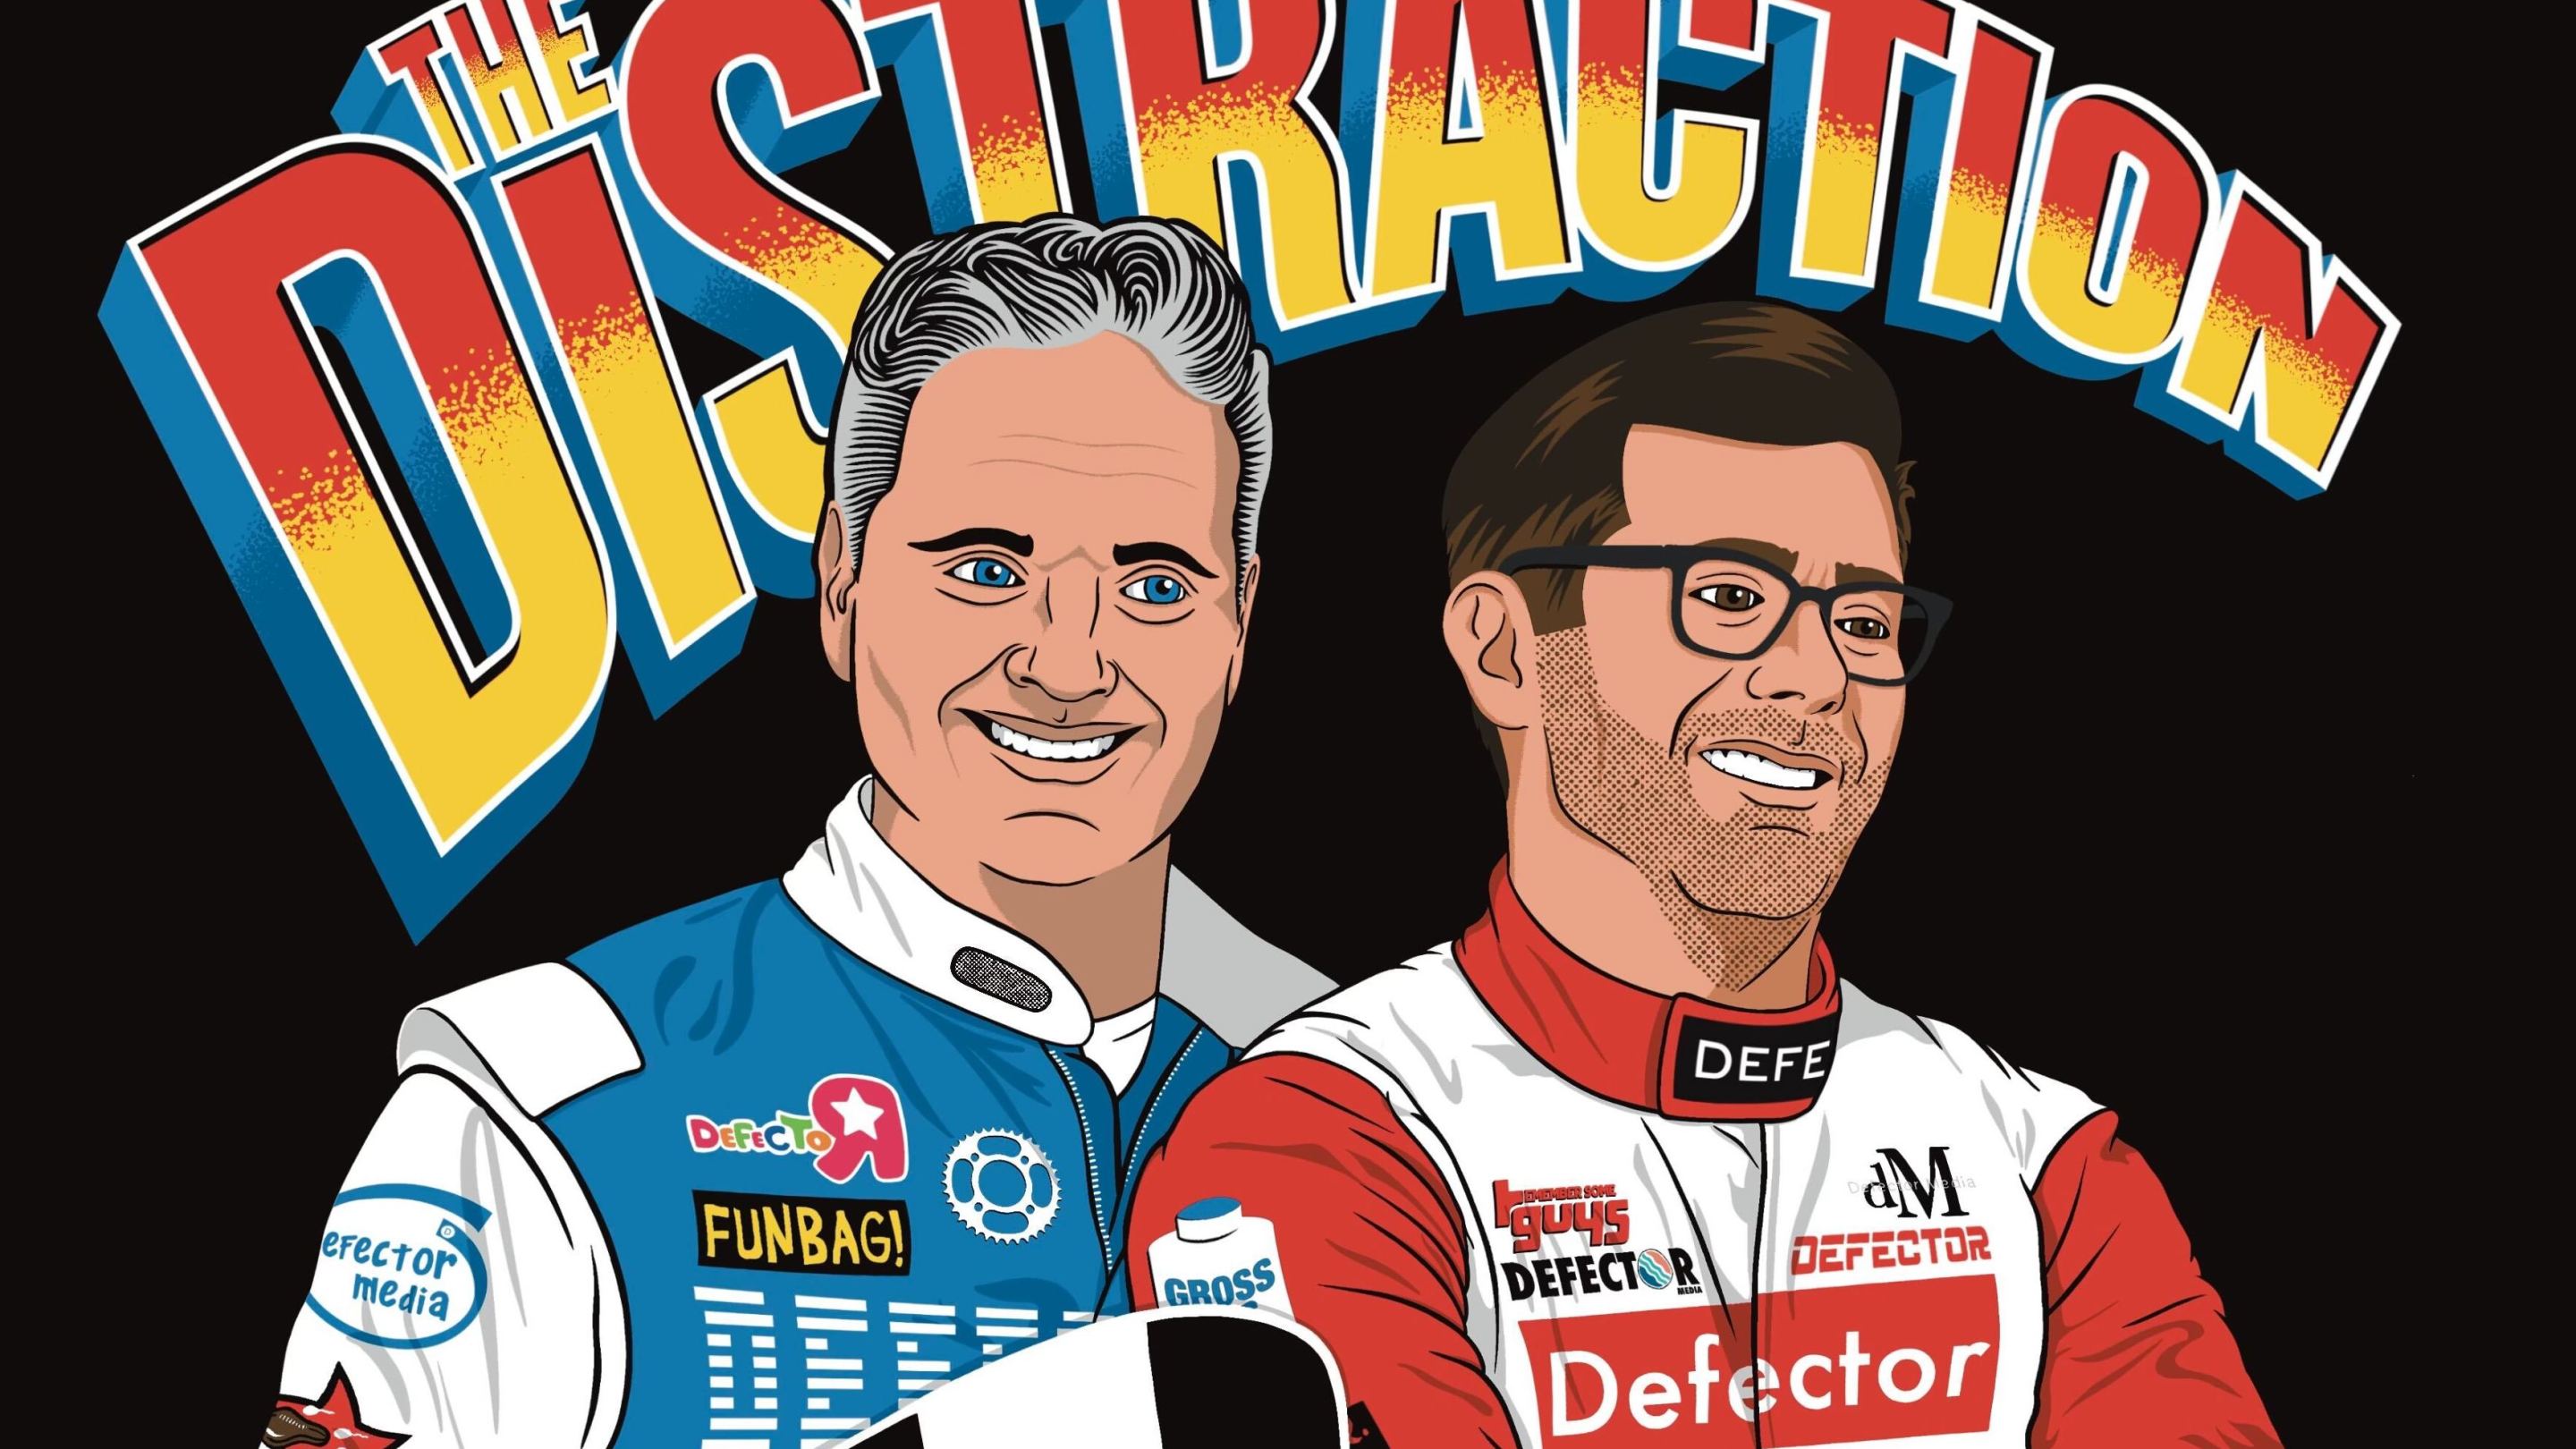 An illustration of the cohosts of The Distraction, in the style of a Nascar fan t-shirt. We're both wearing those fire-suits and appear deeply tan.